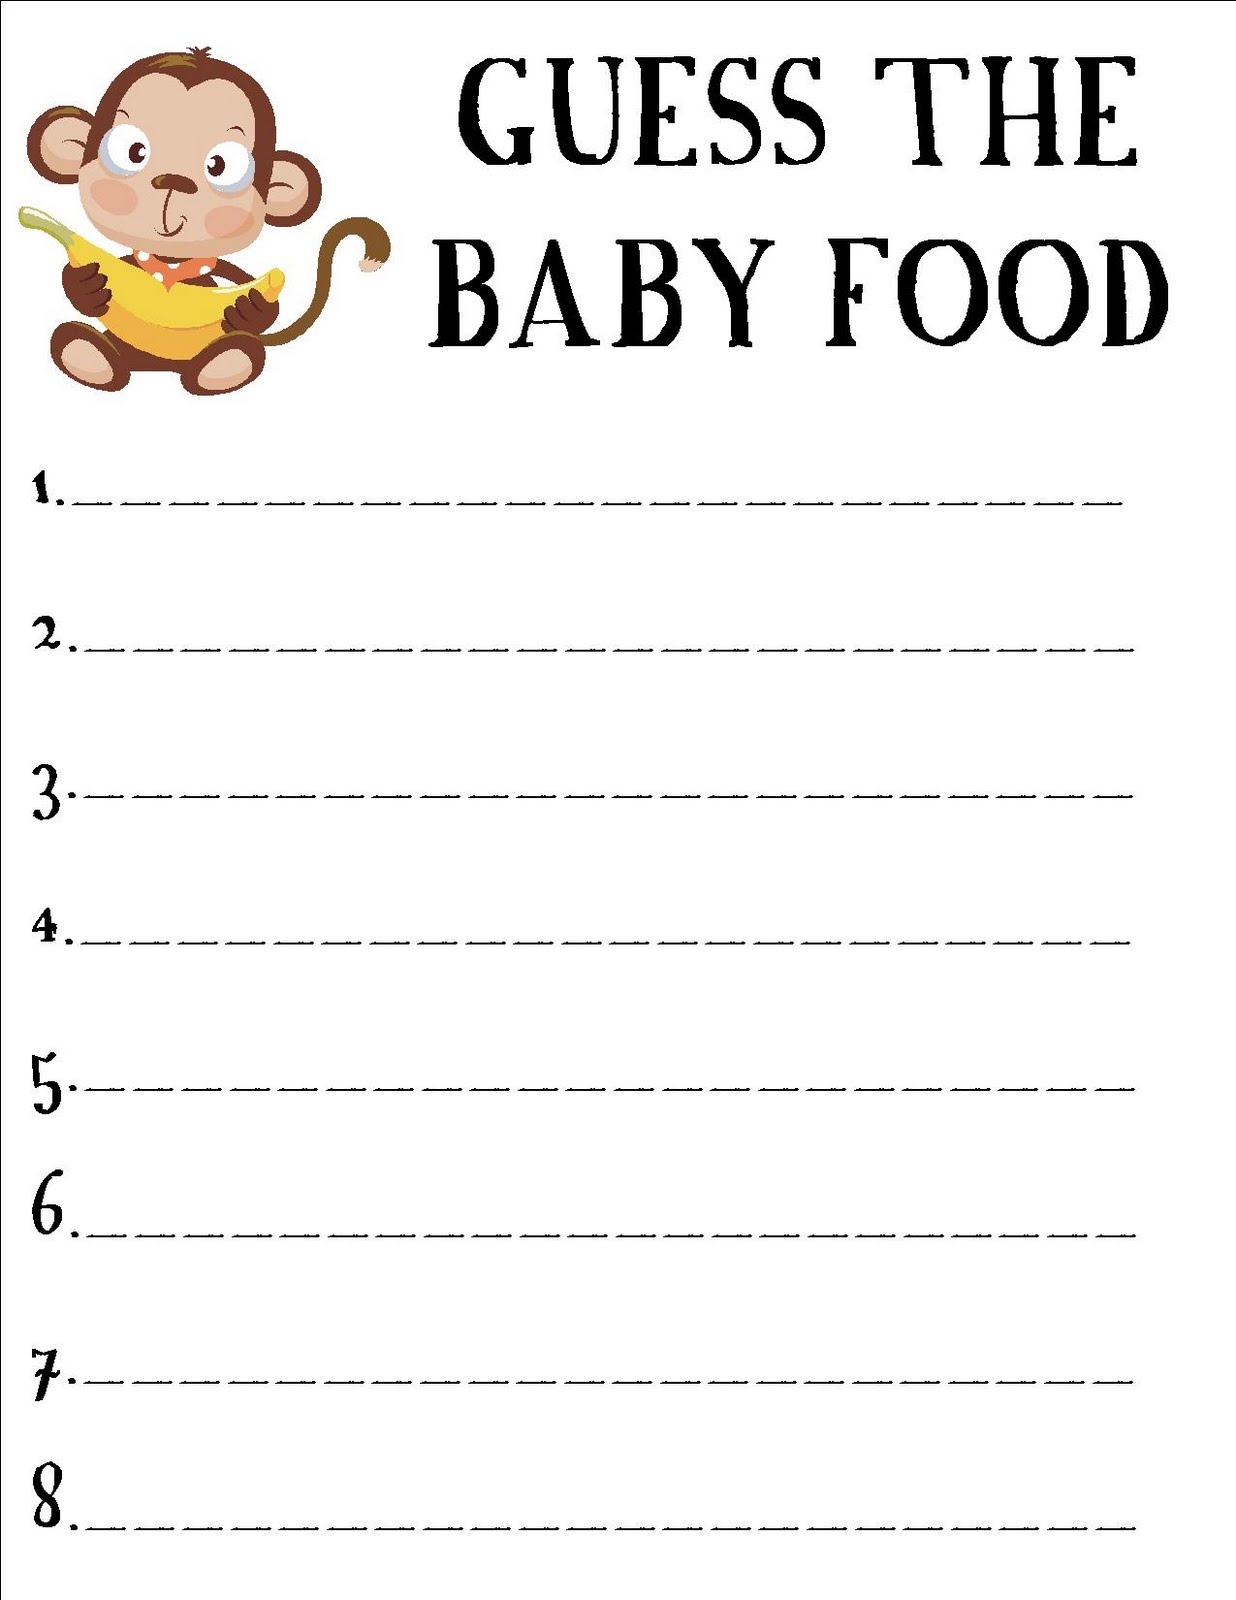 221 New baby shower game guess the baby food 307 guess the baby food.jpg 